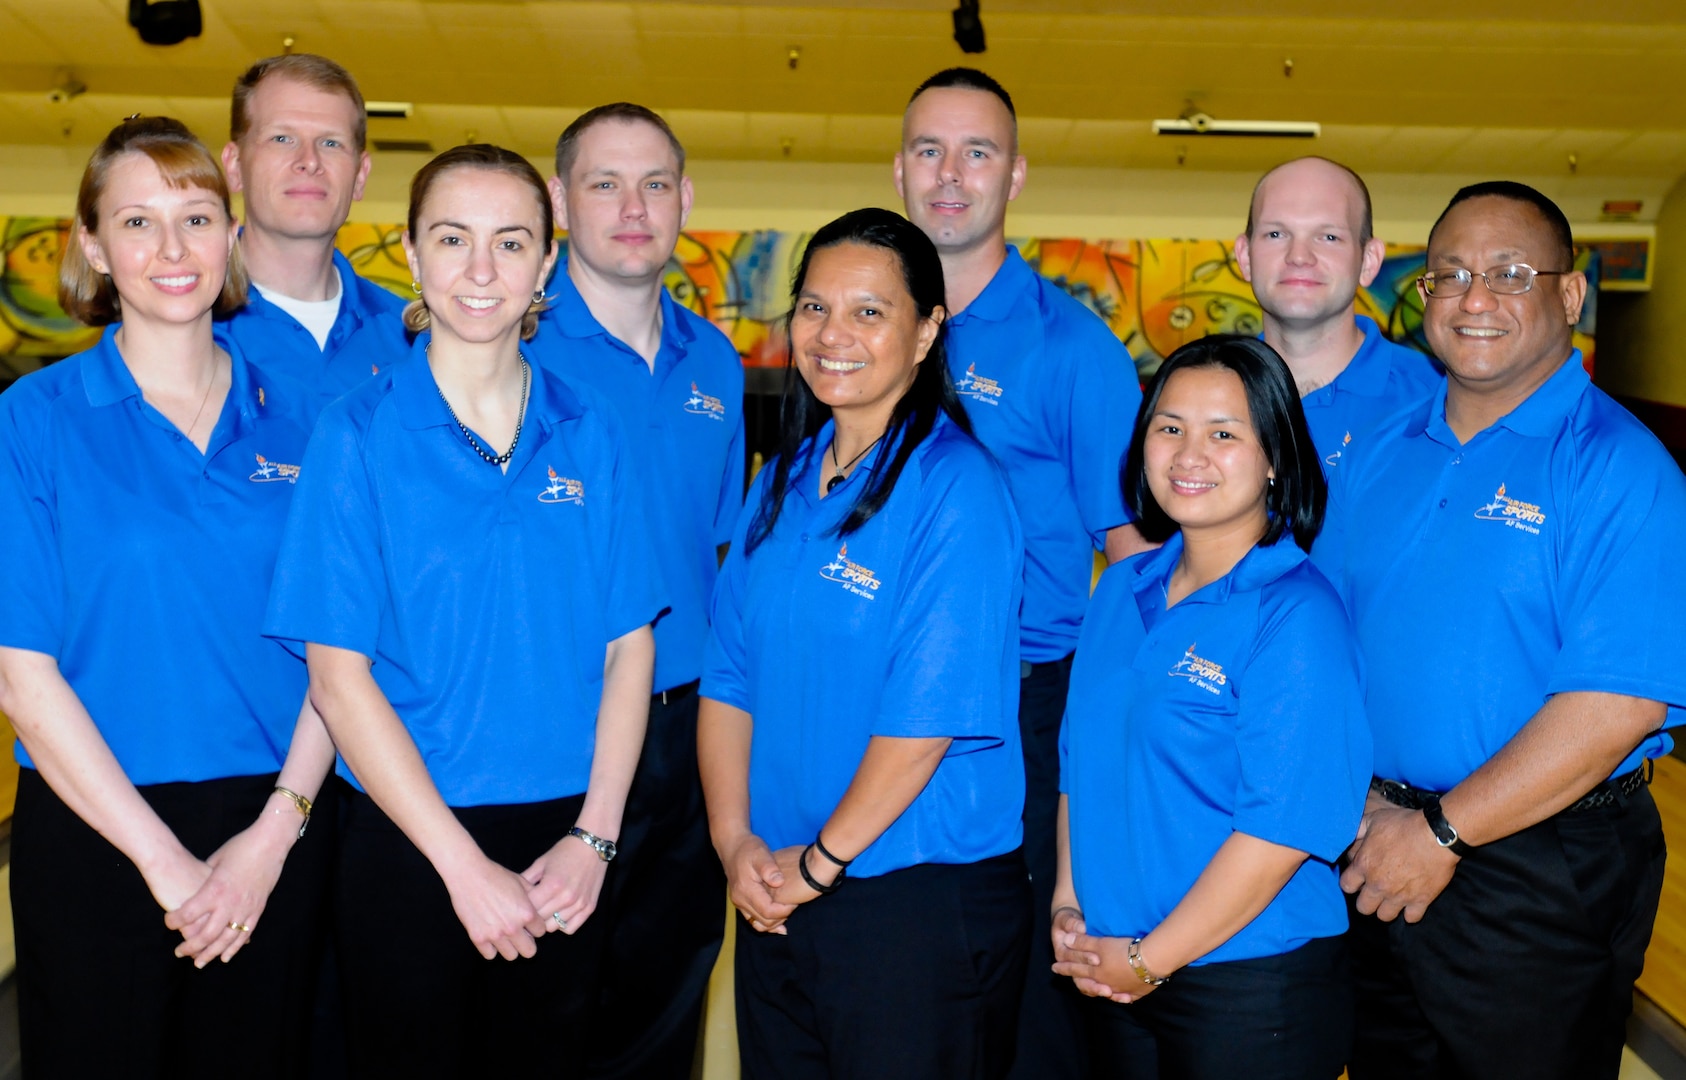 Airmen from across the Air Force competed against the All-Army and All-Air Force bowling teams during the 2014 Armed Forces Bowling Championship at Joint Base Lewis-McChord, Wash., May 12-16.